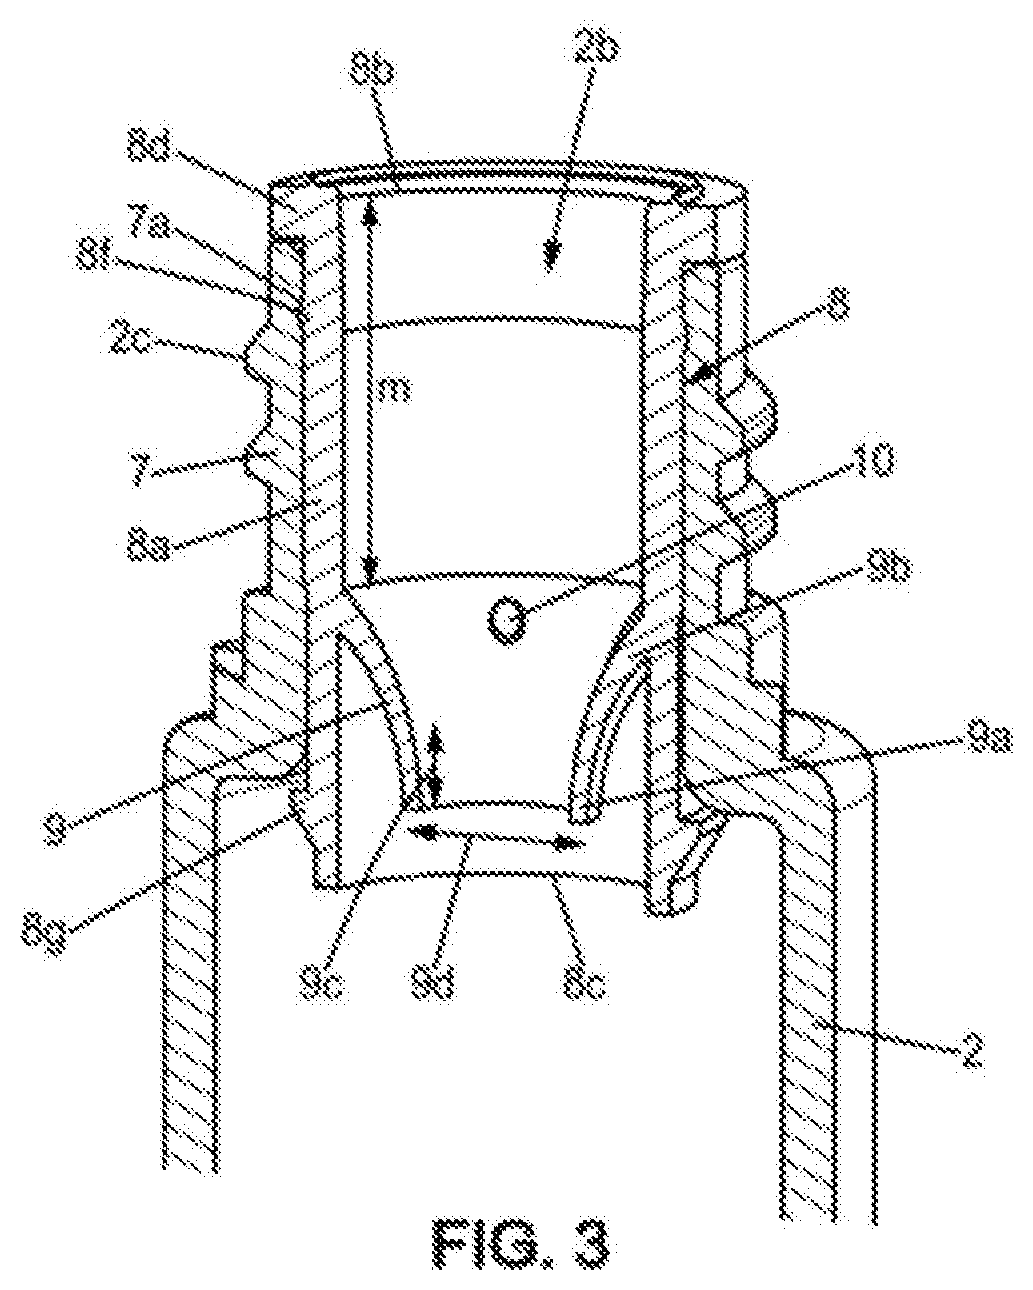 Wiper member for a device for the packaging and application of a cosmetic product